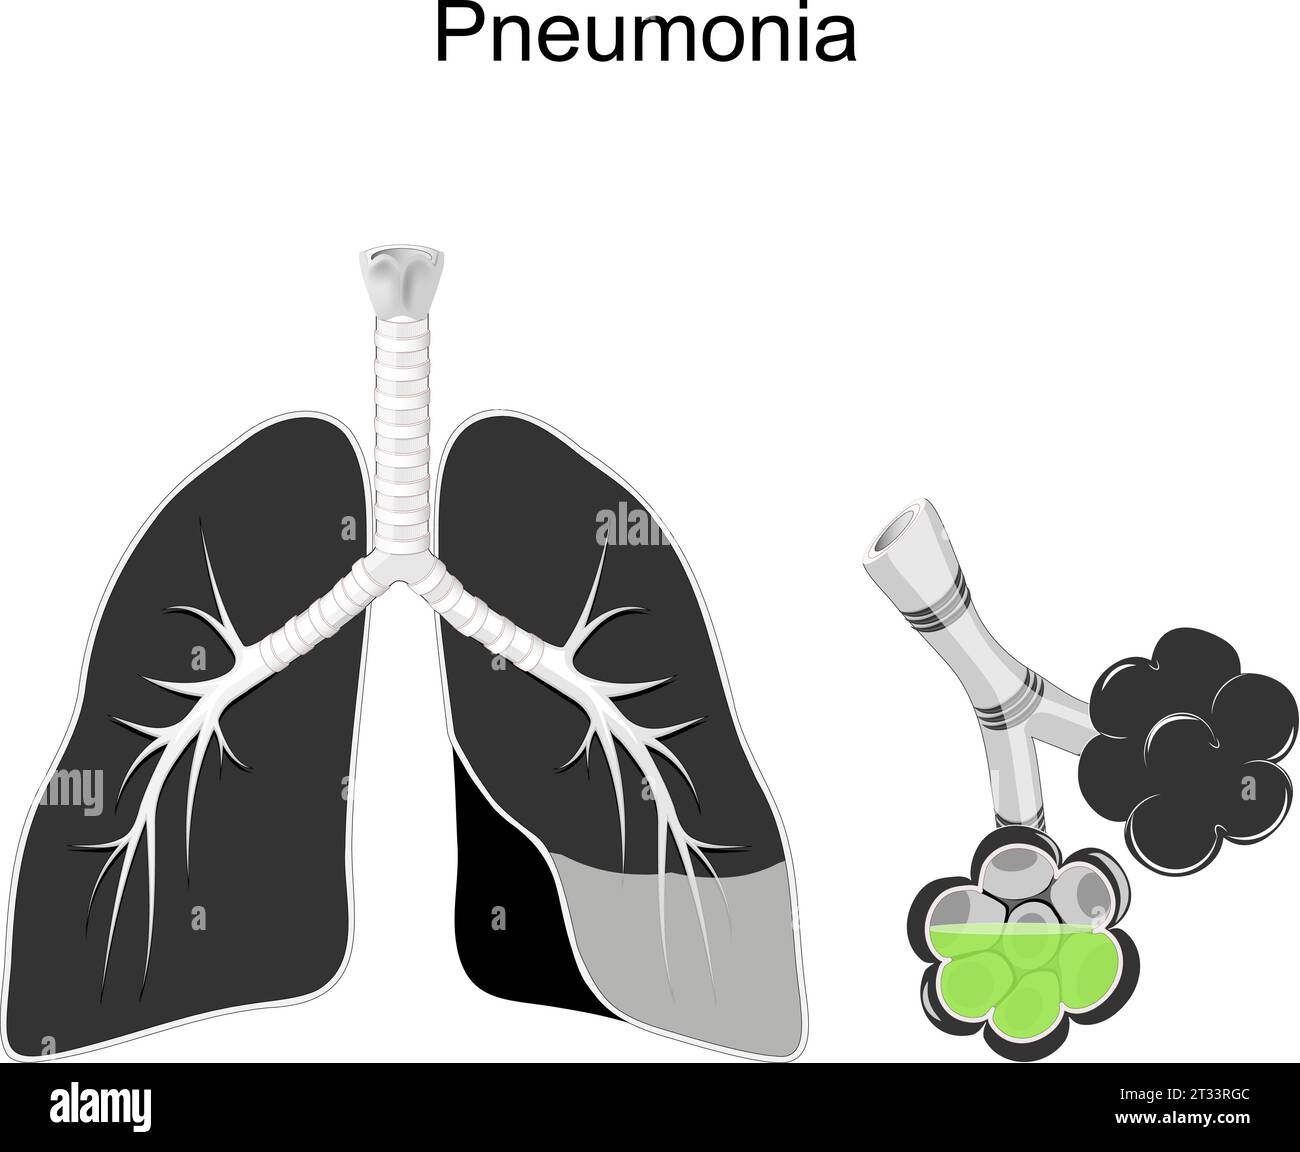 Pneumonia. Cross section of human lungs, bronchi and alveoli with green fluid Respiratory infection.  Black and white Vector illustration about Pneumo Stock Vector